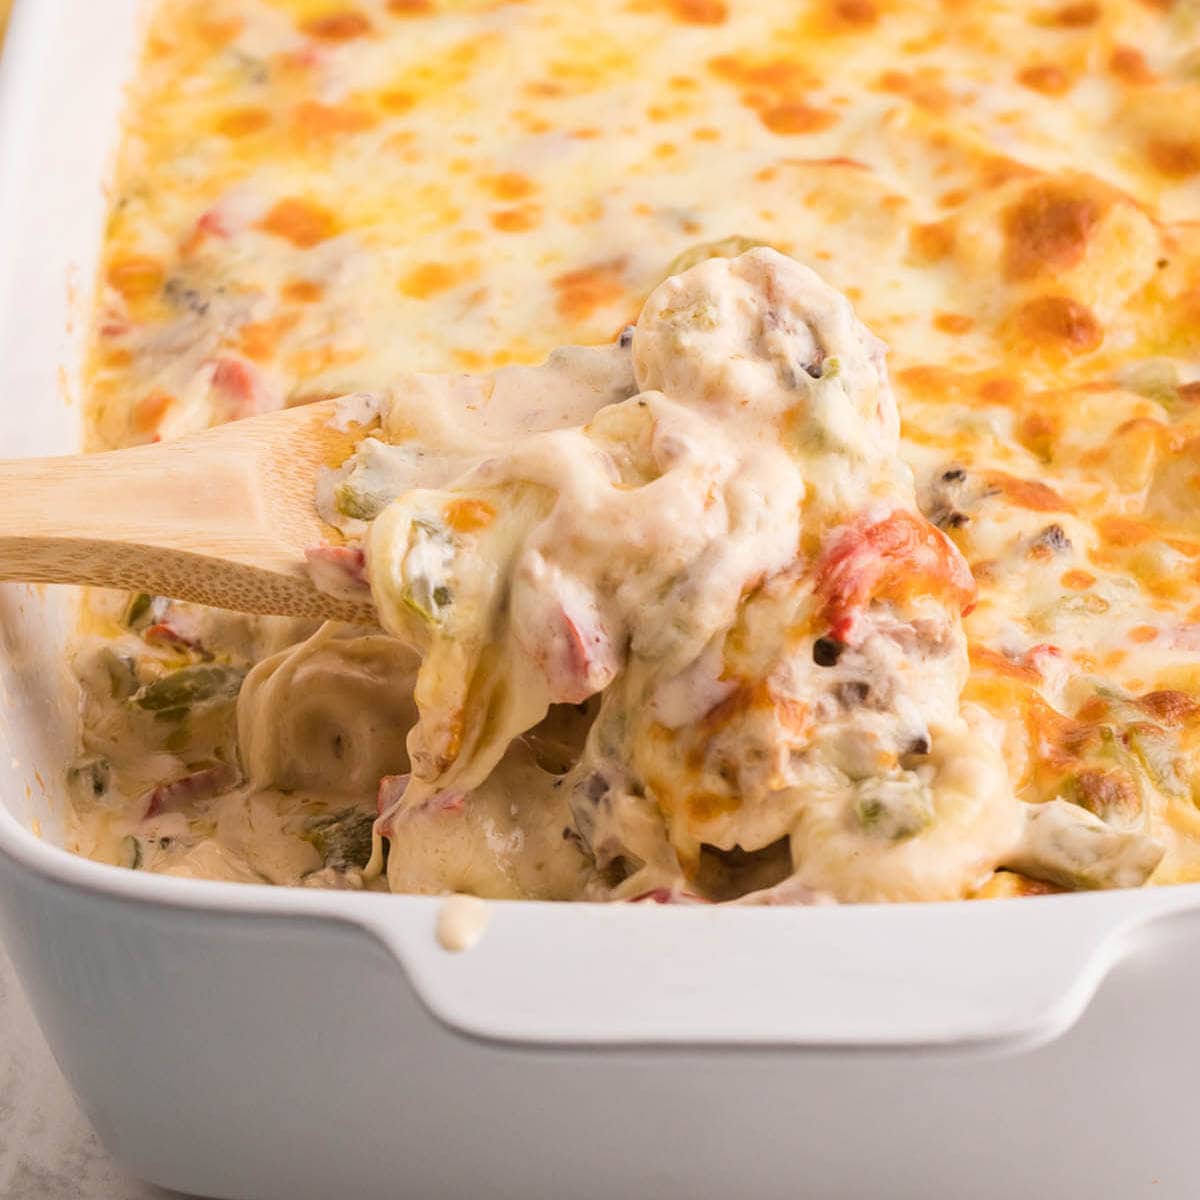 Cheesy baked pasta in casserole dish with spoon.